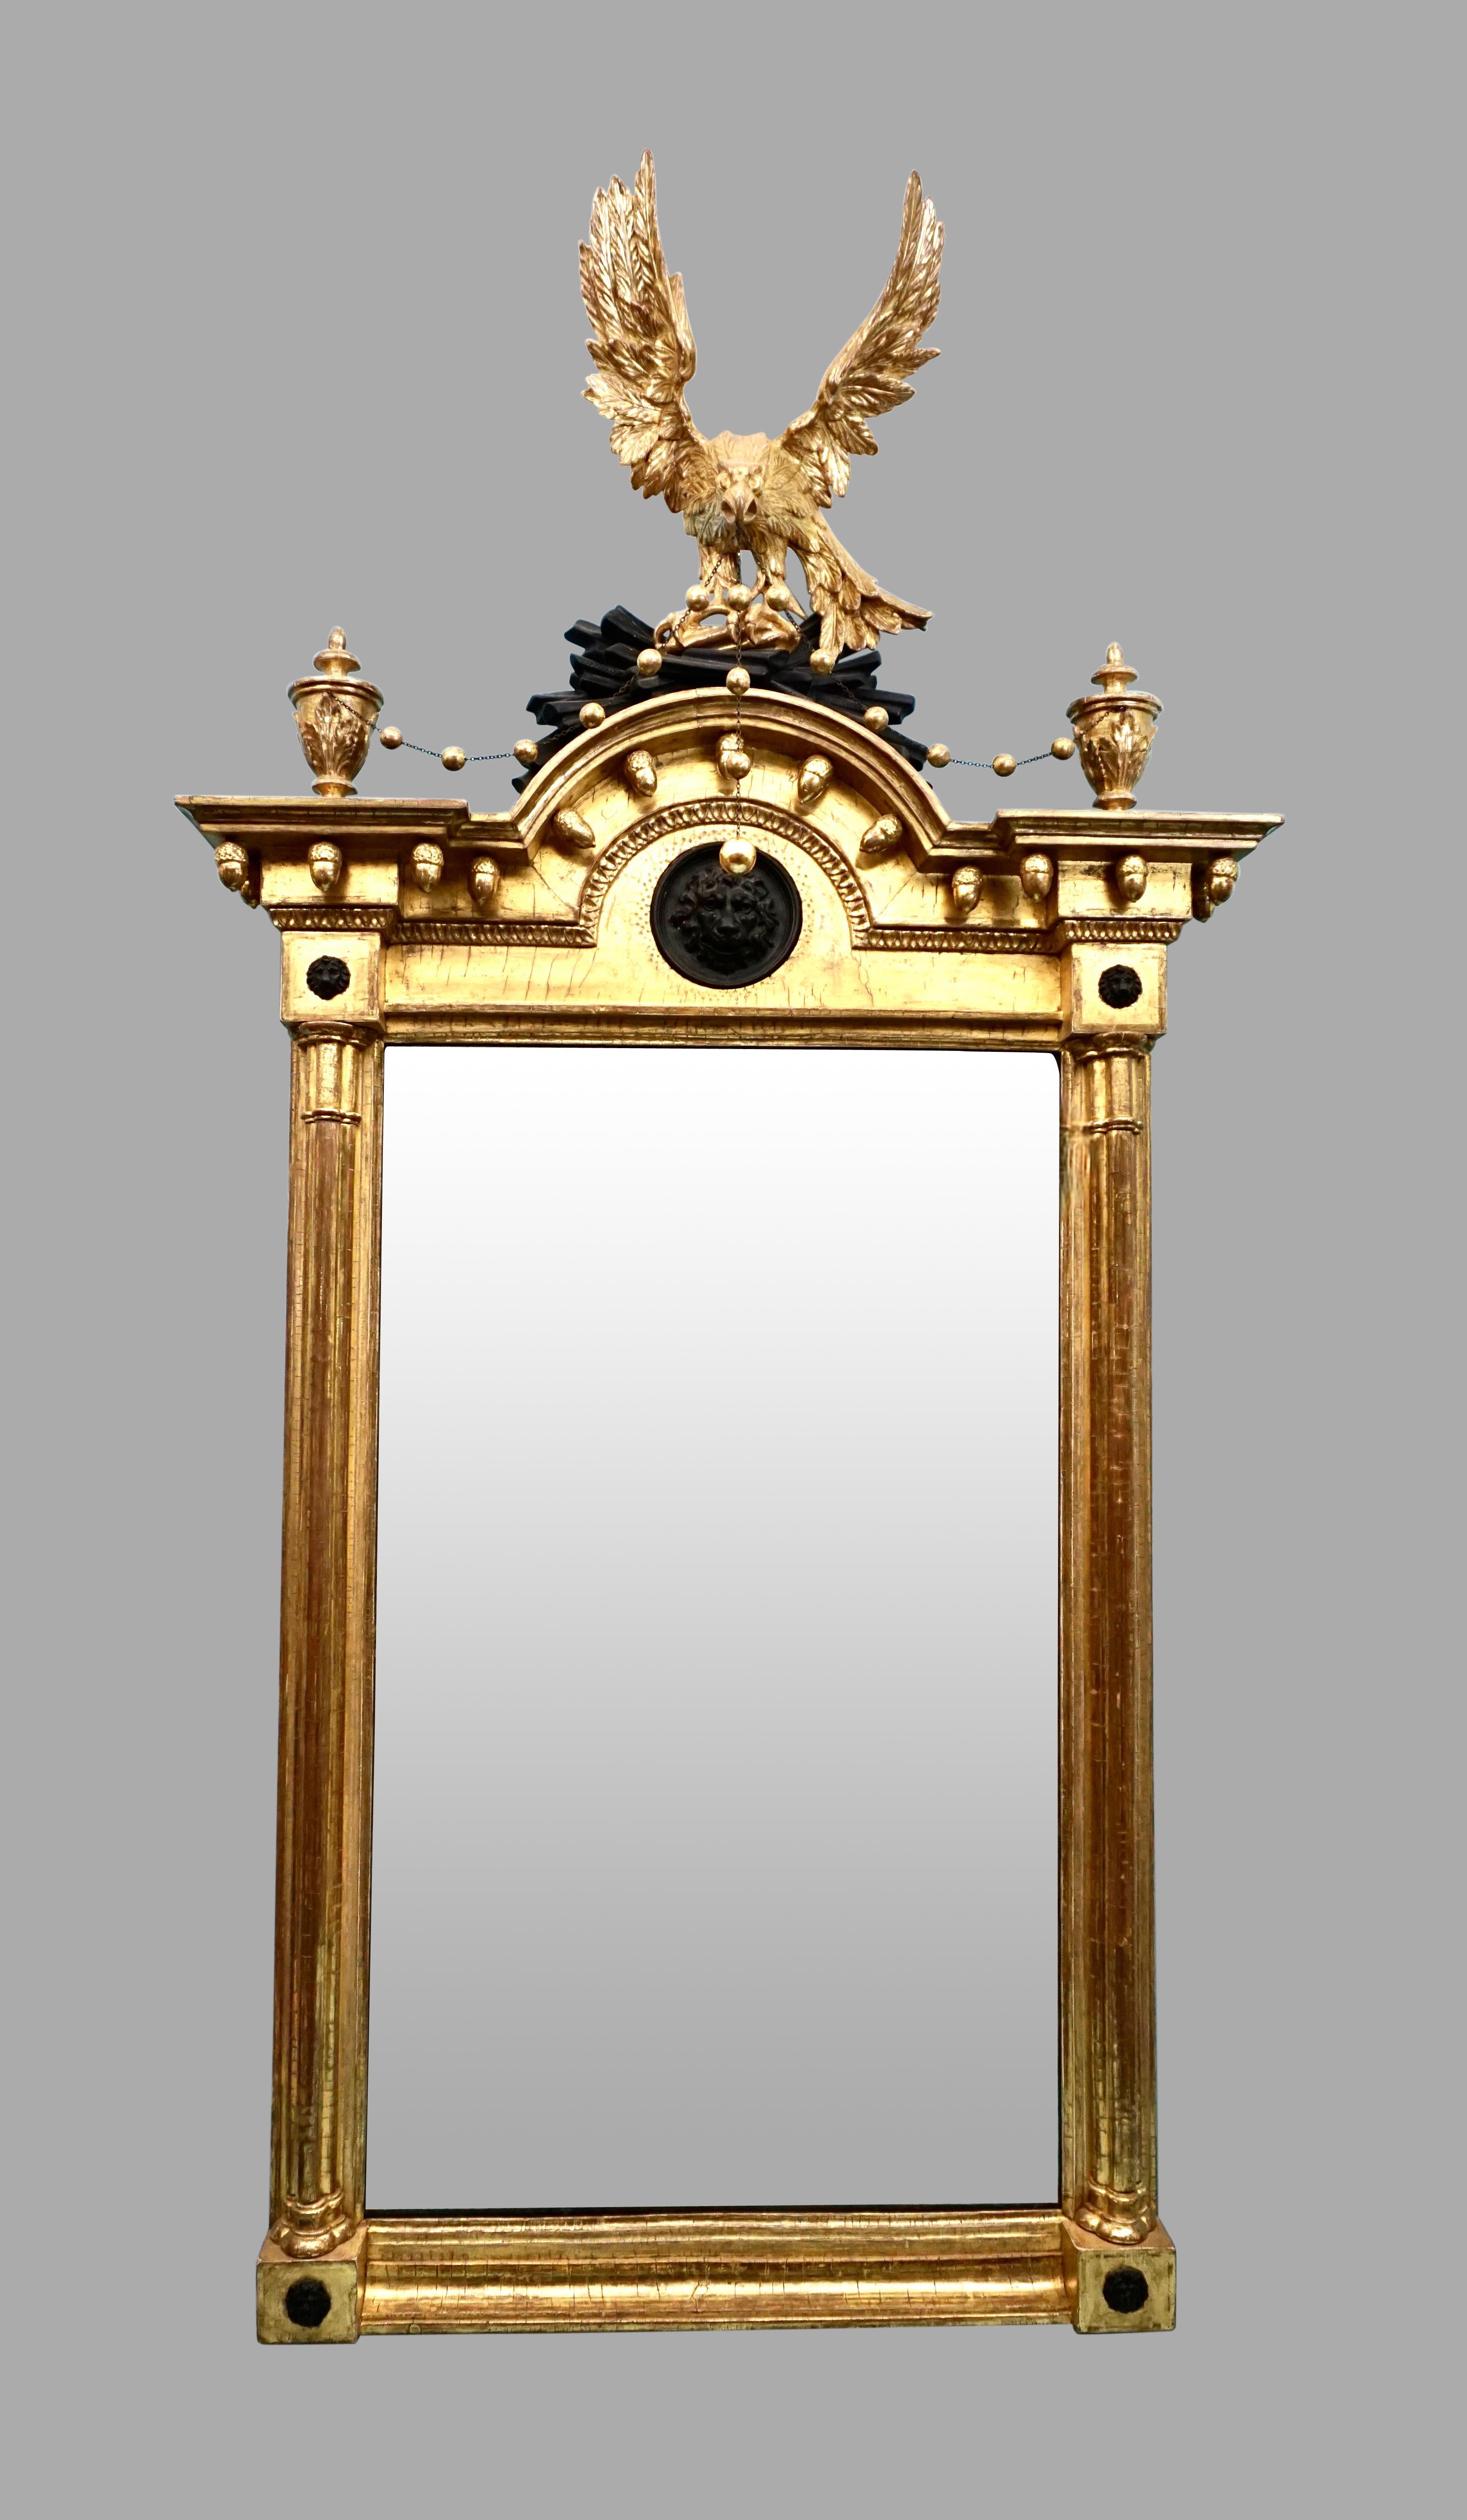 A superb quality English Regency period pier mirror, the replaced mirror plate surmounted by a beautifully carved eagle with spread wings and a downward gaze atop a demilune cresting centered with an ebonized lion mask. The eagle holds a delicate